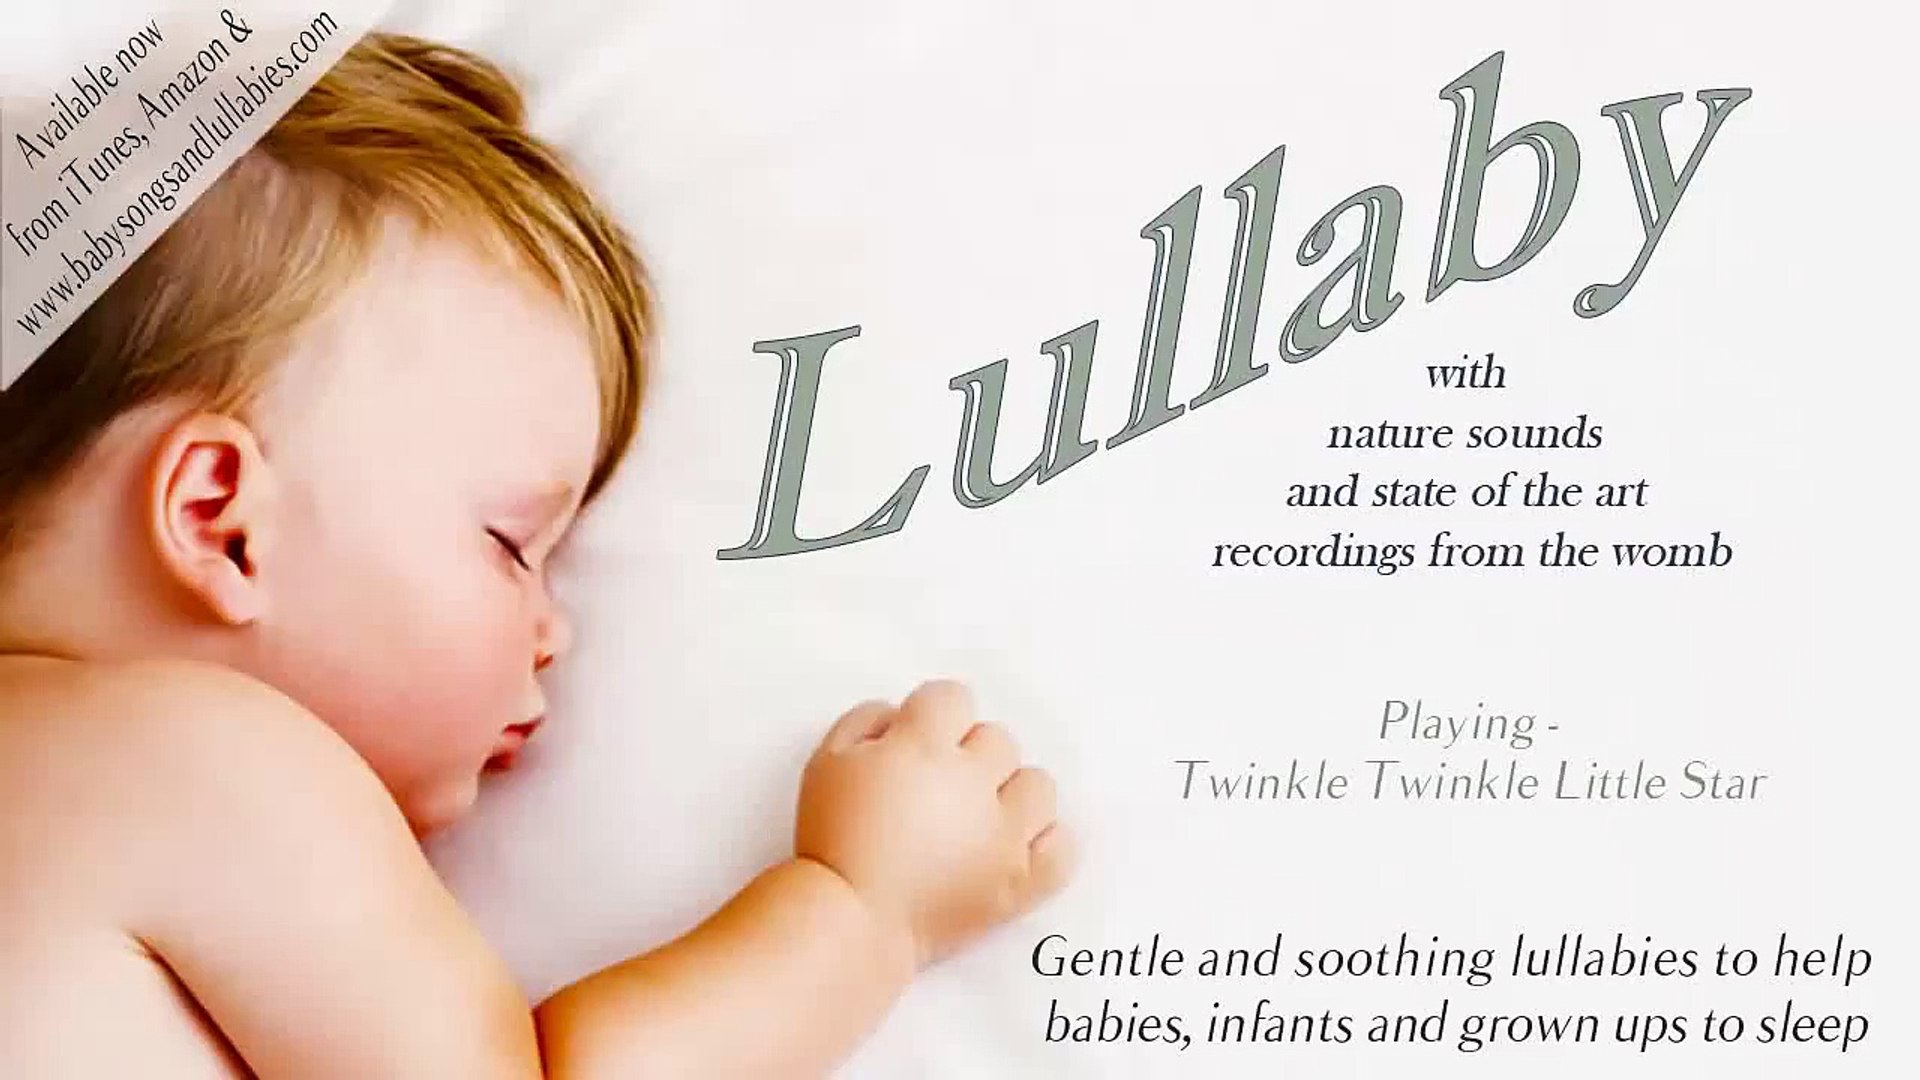 Lullaby for Babies - Relaxing Lullabies and Children Songs with Nature Sounds and Womb Rec